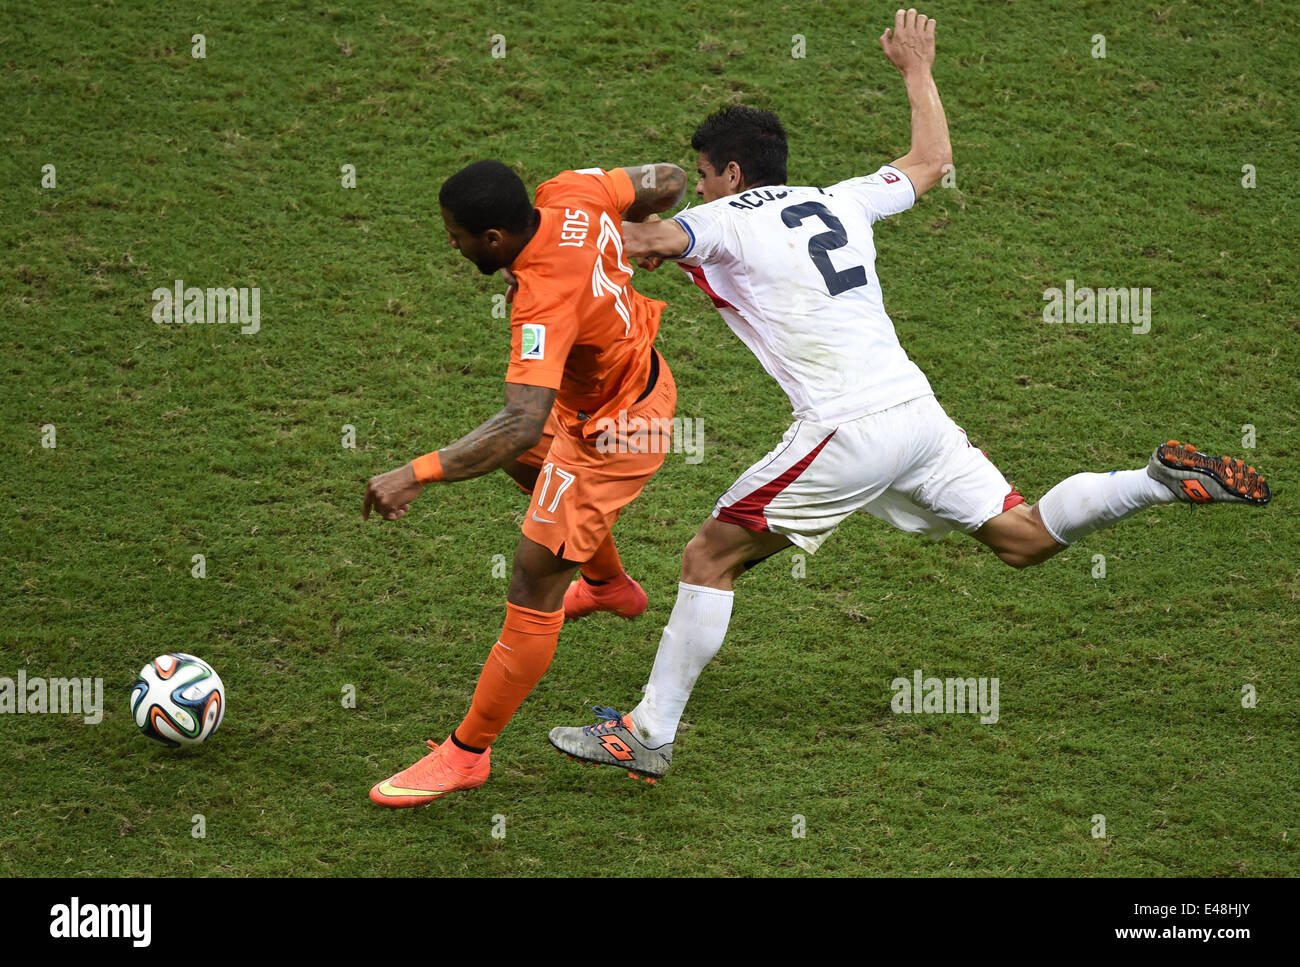 Salvador, Brazil. 5th July, 2014. Netherlands' Jeremain Lens (L) vies with Costa Rica's Johnny Acosta during a quarter-finals match between Netherlands and Costa Rica of 2014 FIFA World Cup at the Arena Fonte Nova Stadium in Salvador, Brazil, on July 5, 2014. Credit:  Yang Lei/Xinhua/Alamy Live News Stock Photo